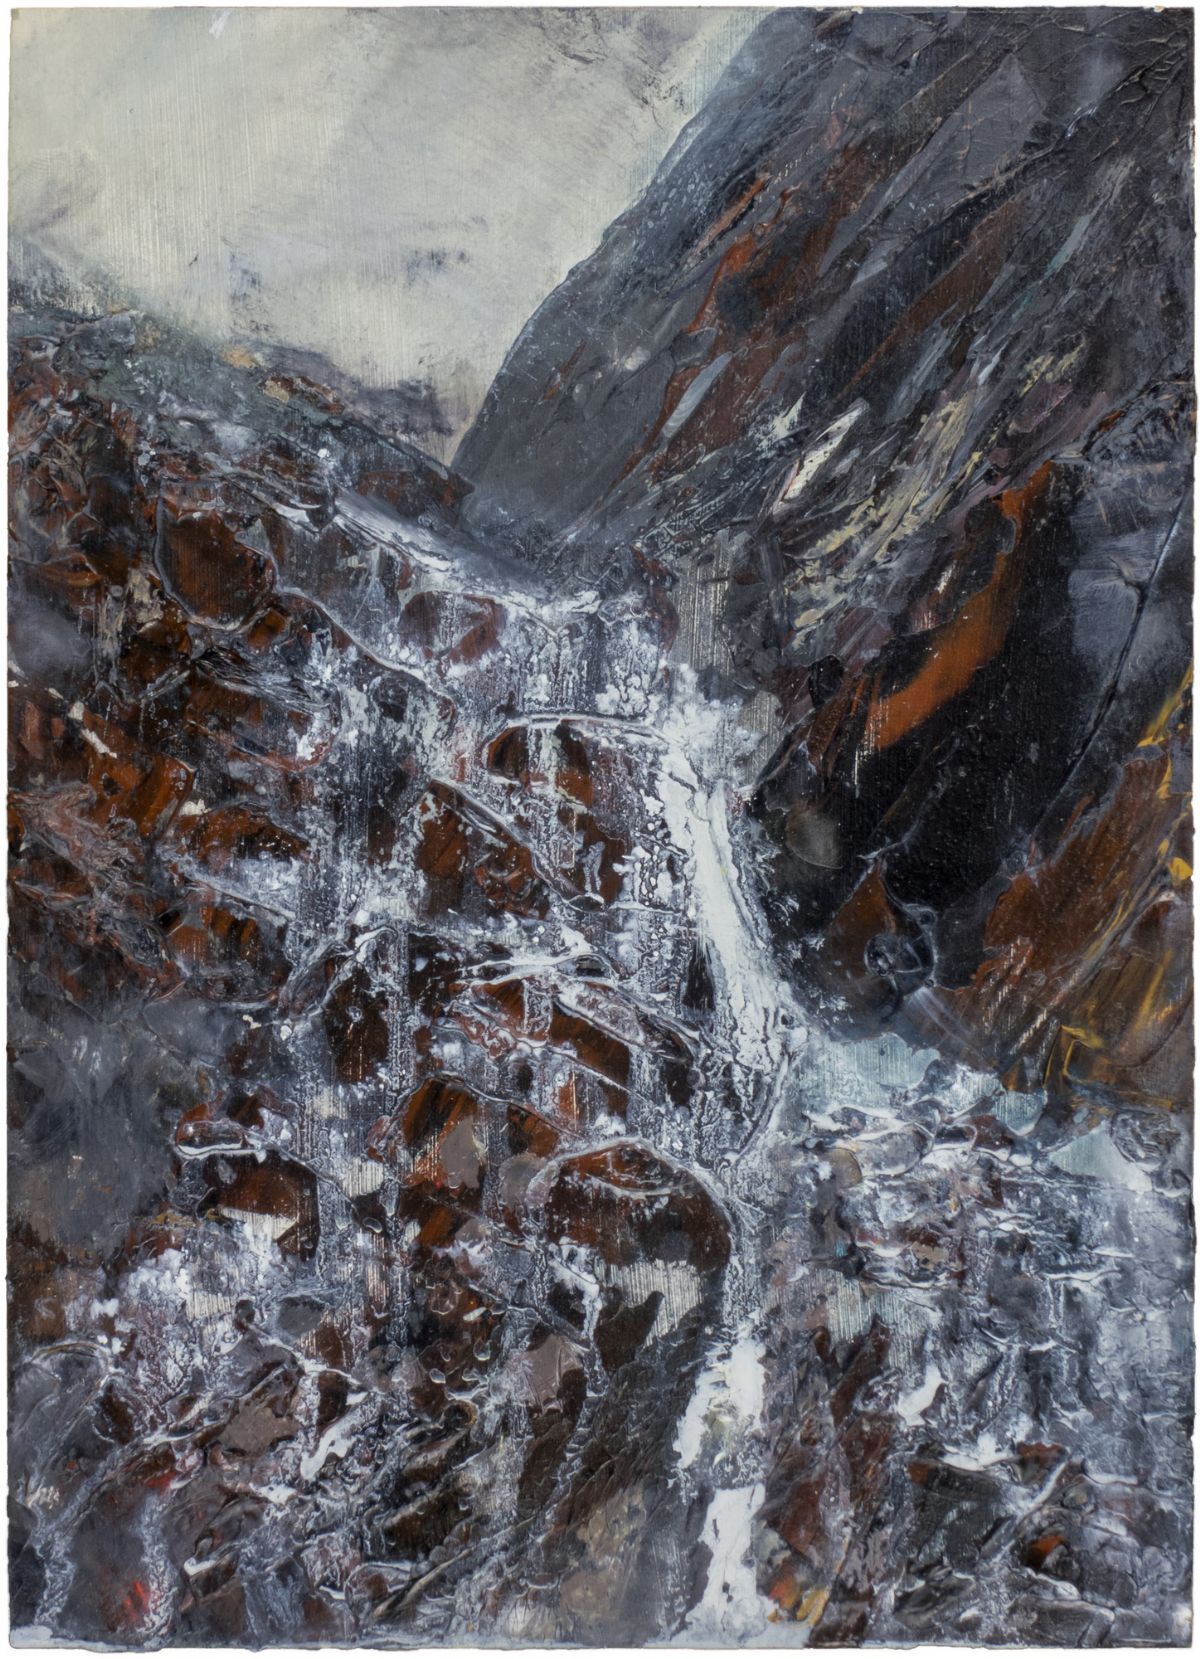 ‘Flowing from granite. The Living Mountain Series’.